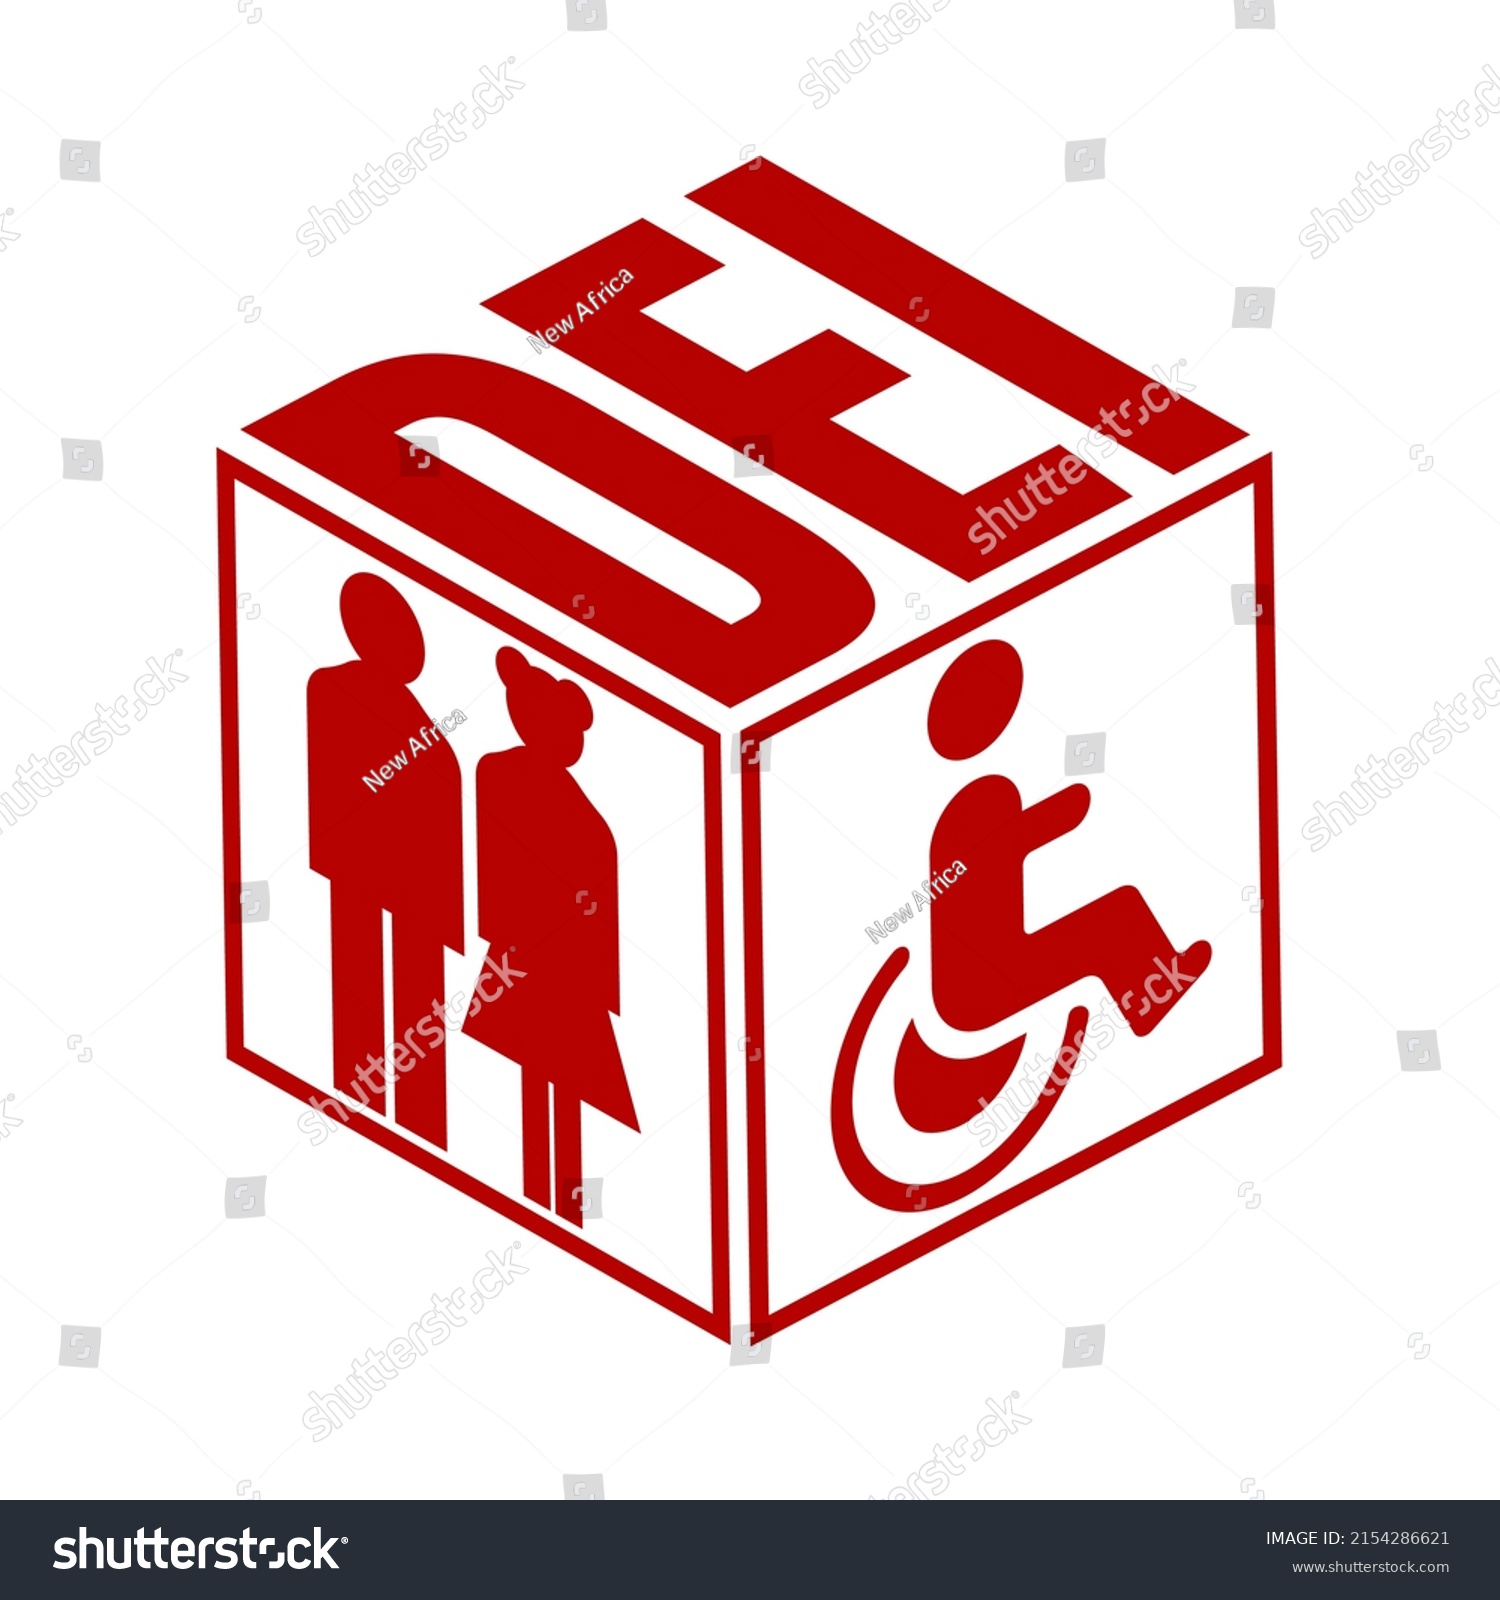 Concept Dei Diversity Equality Inclusion Illustration Stock